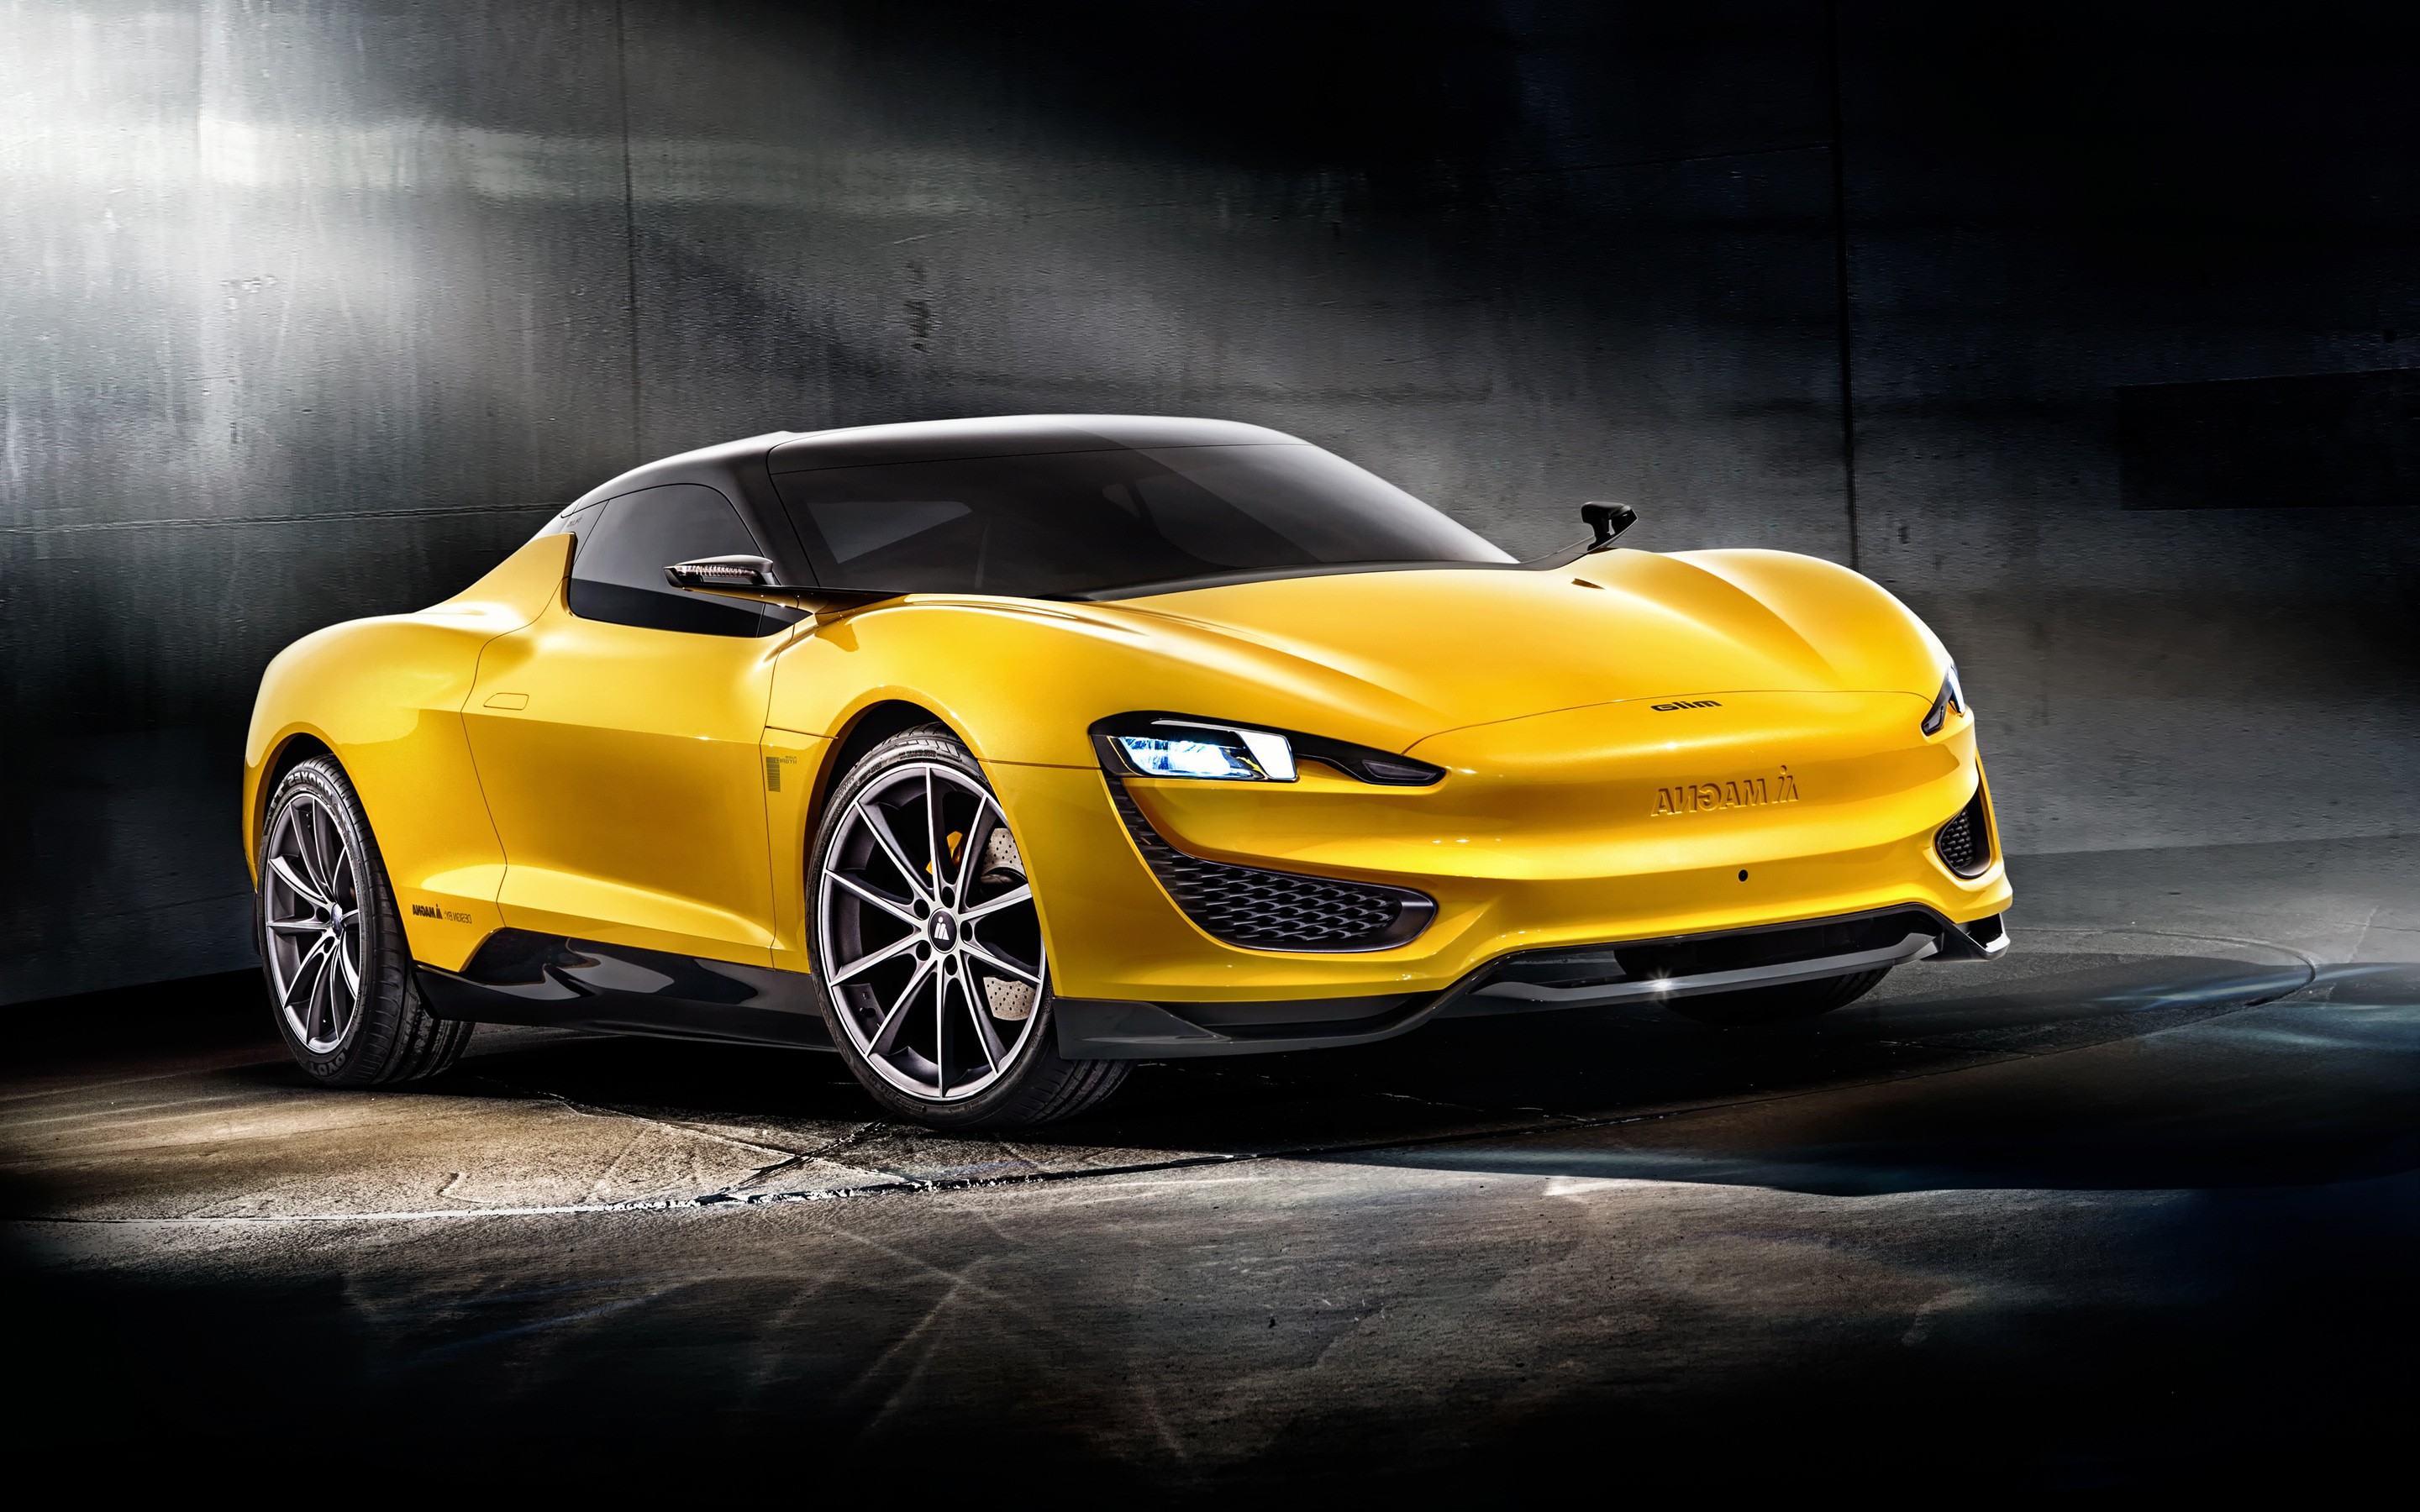 Magna steyr mila plus hybrid hd cars k wallpapers images backgrounds photos and pictures